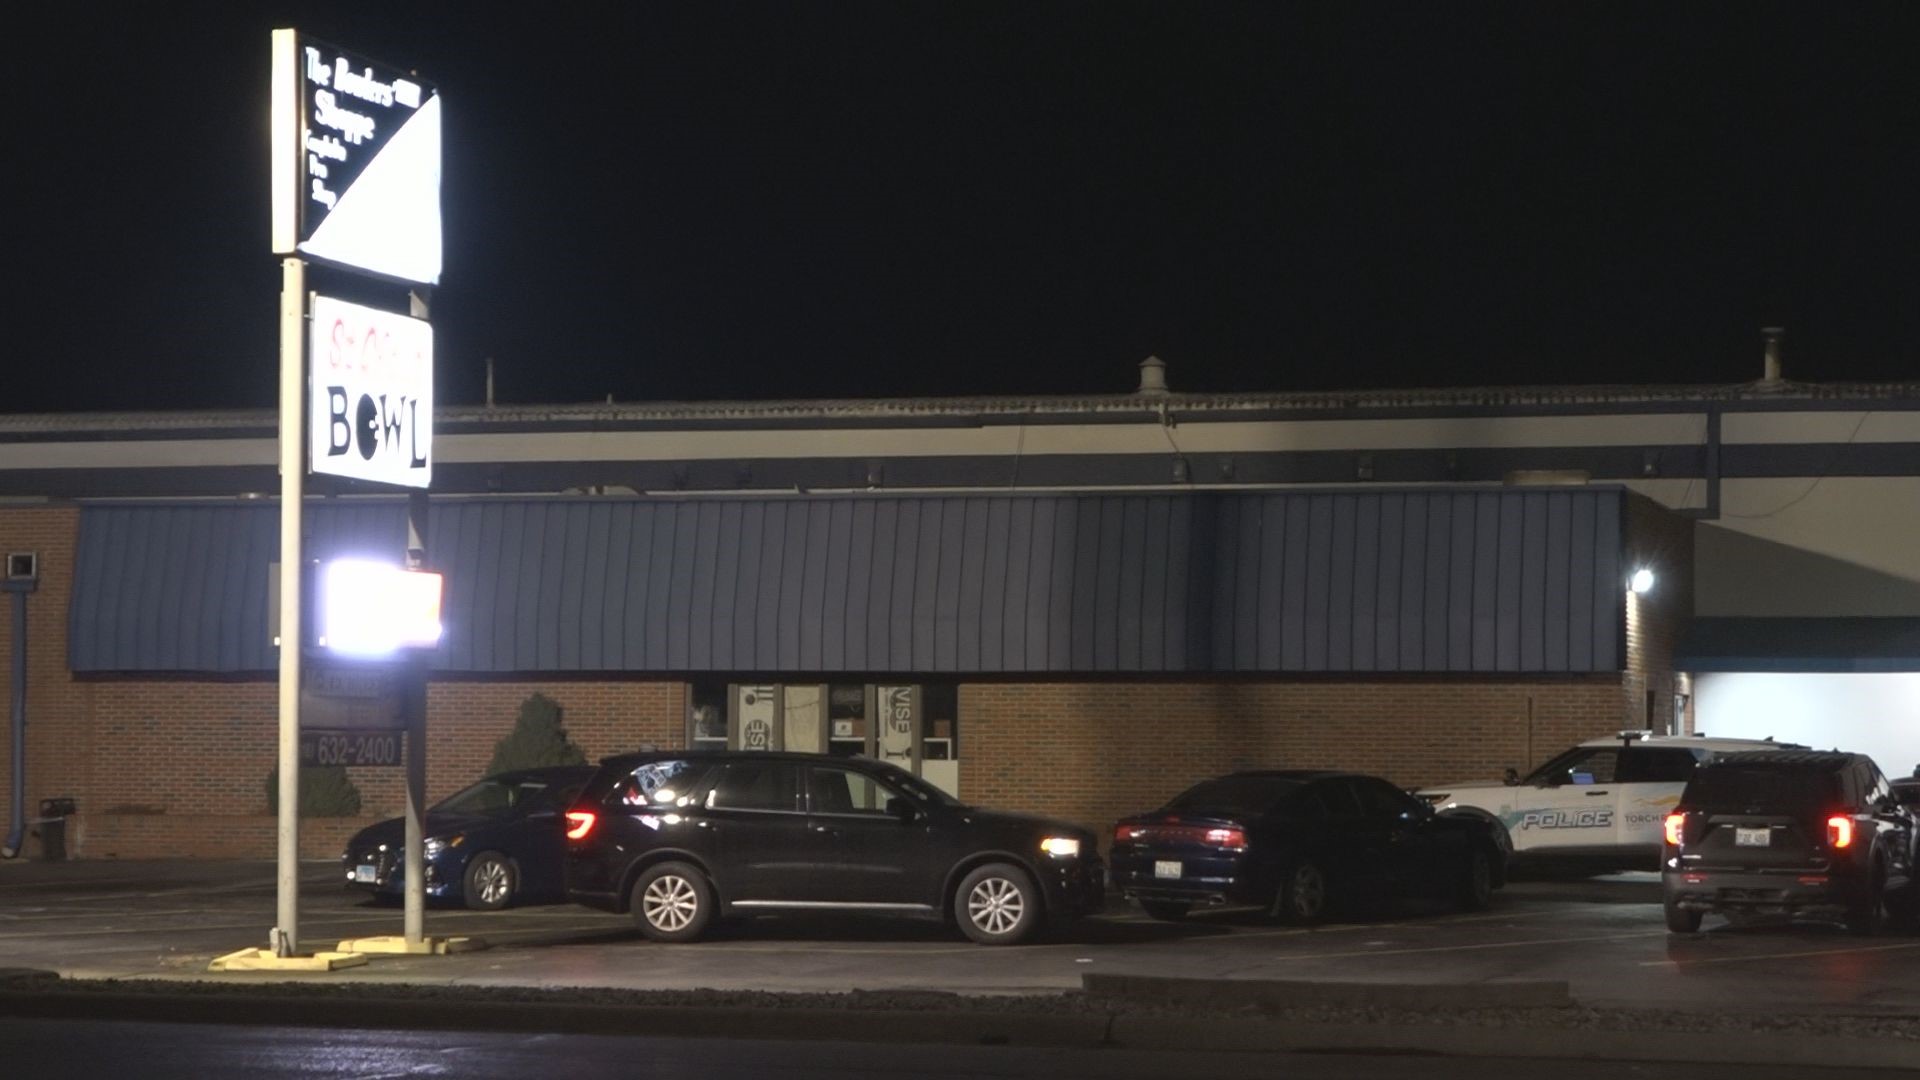 Shocking news, st clair bowl shooting: What sparked the shooting at Metro East bowling alley. 2